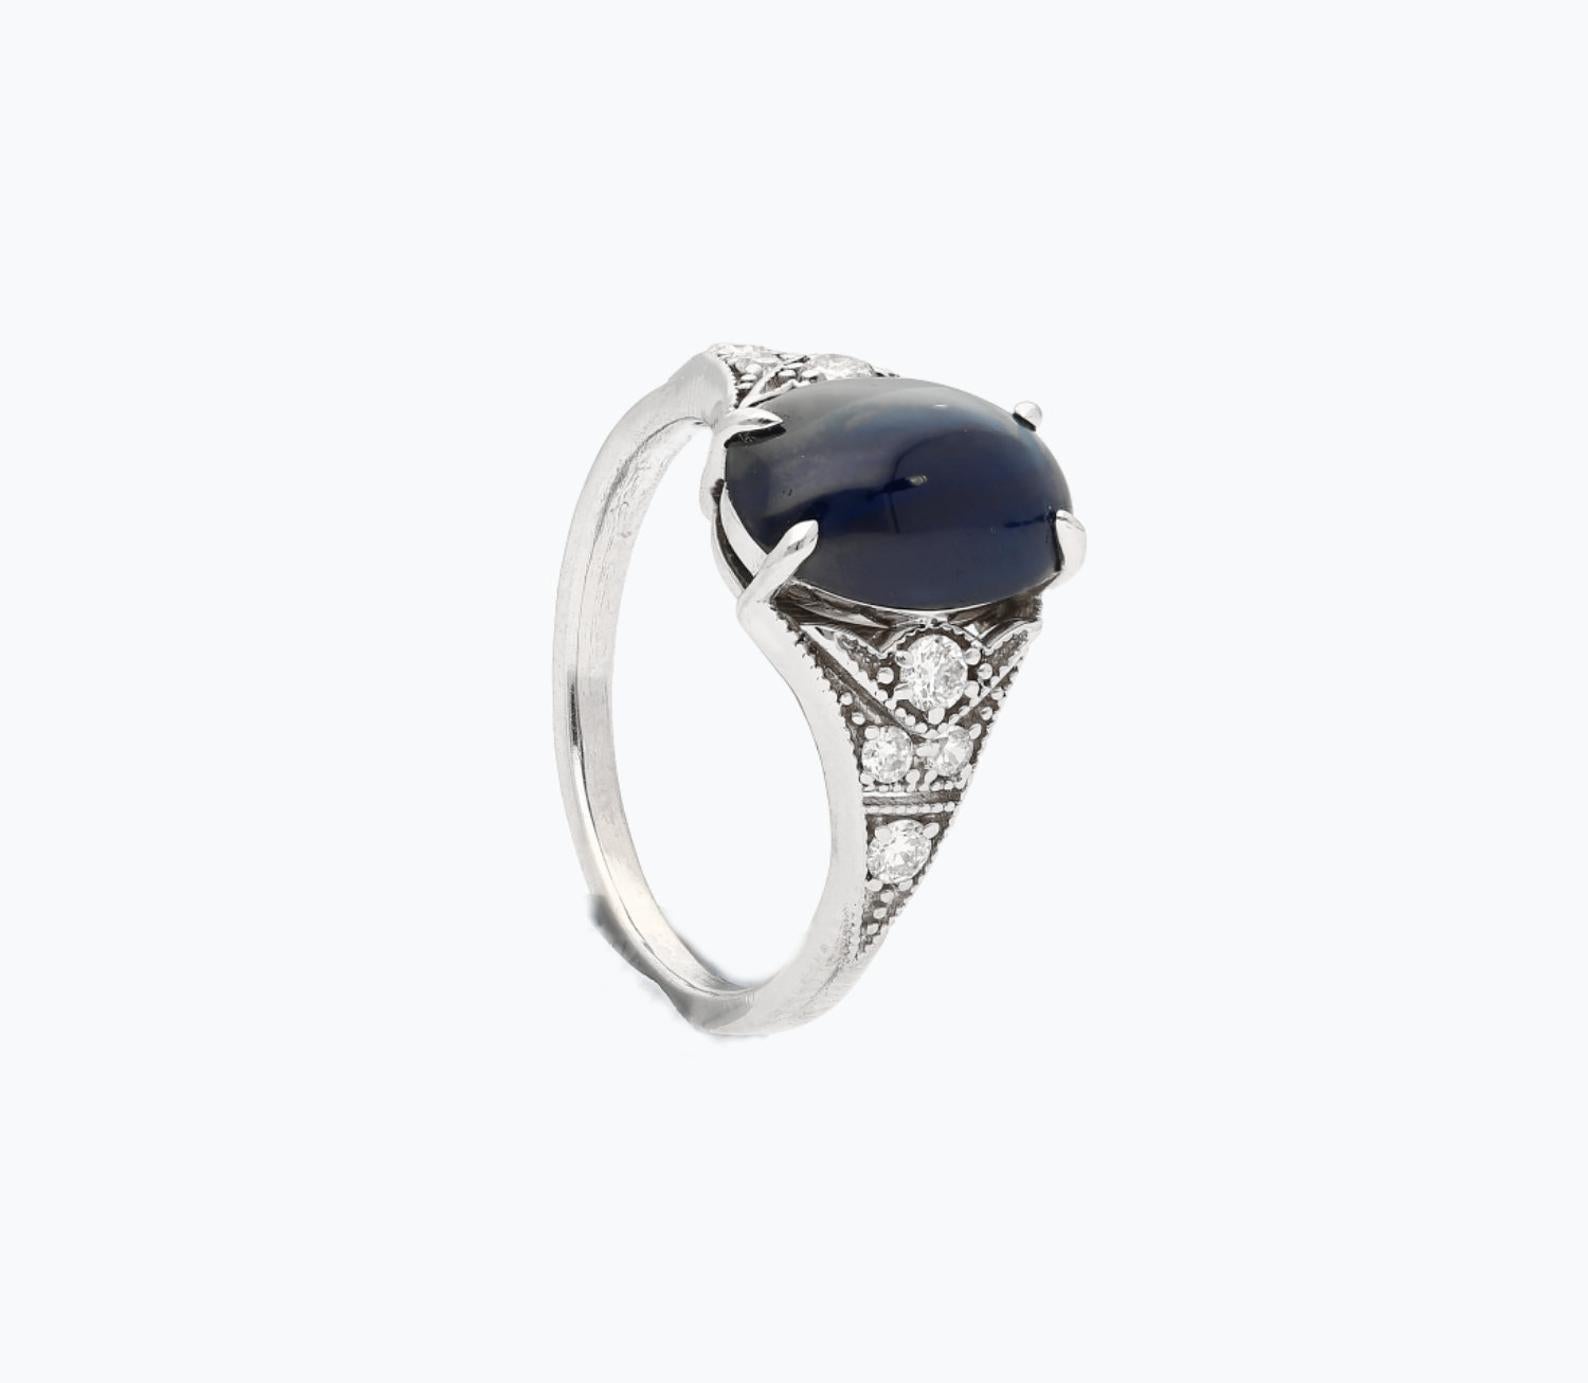 Centering a 3.50 Carat Cabochon-Cut Ceylon Sri Lanka Blue Sapphire and accented by 8 Old-Mine Cut Diamonds, this Art Deco Era Antique Jewel is a staple of the quality and beauty that made the Art Deco Era so renowned. 

Details:
✔ Gemstone: